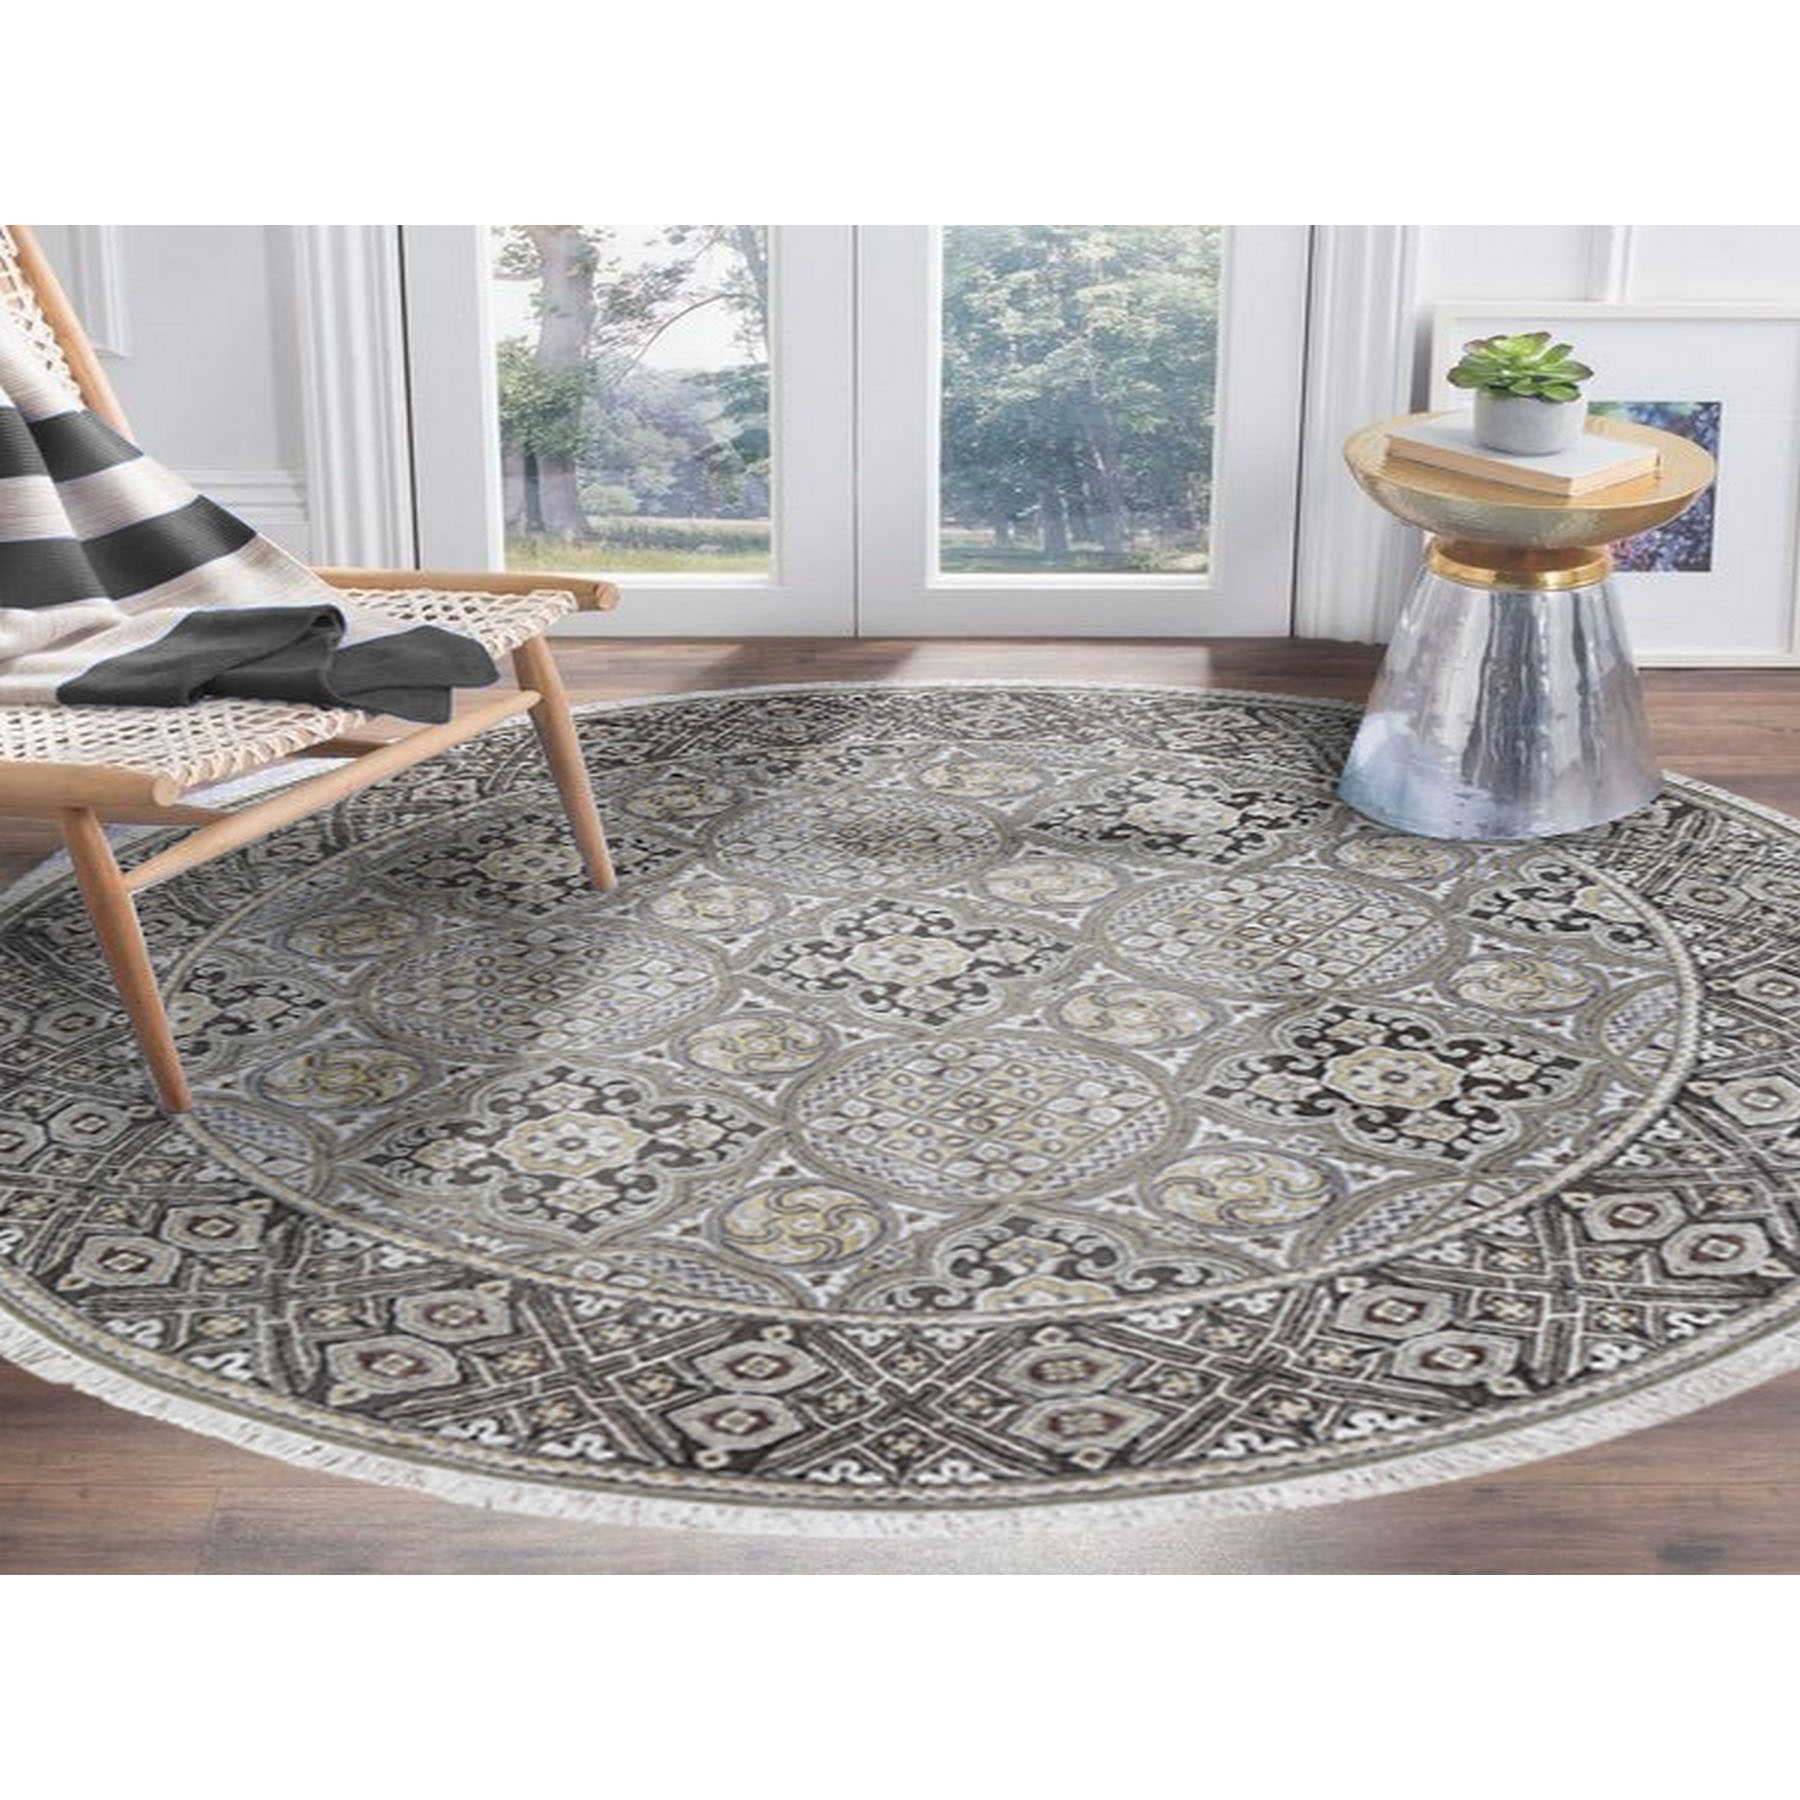 7-10 x7-10  Textured Wool and Silk Mughal Inspired Medallions Round Hand-Knotted Oriental Rug 